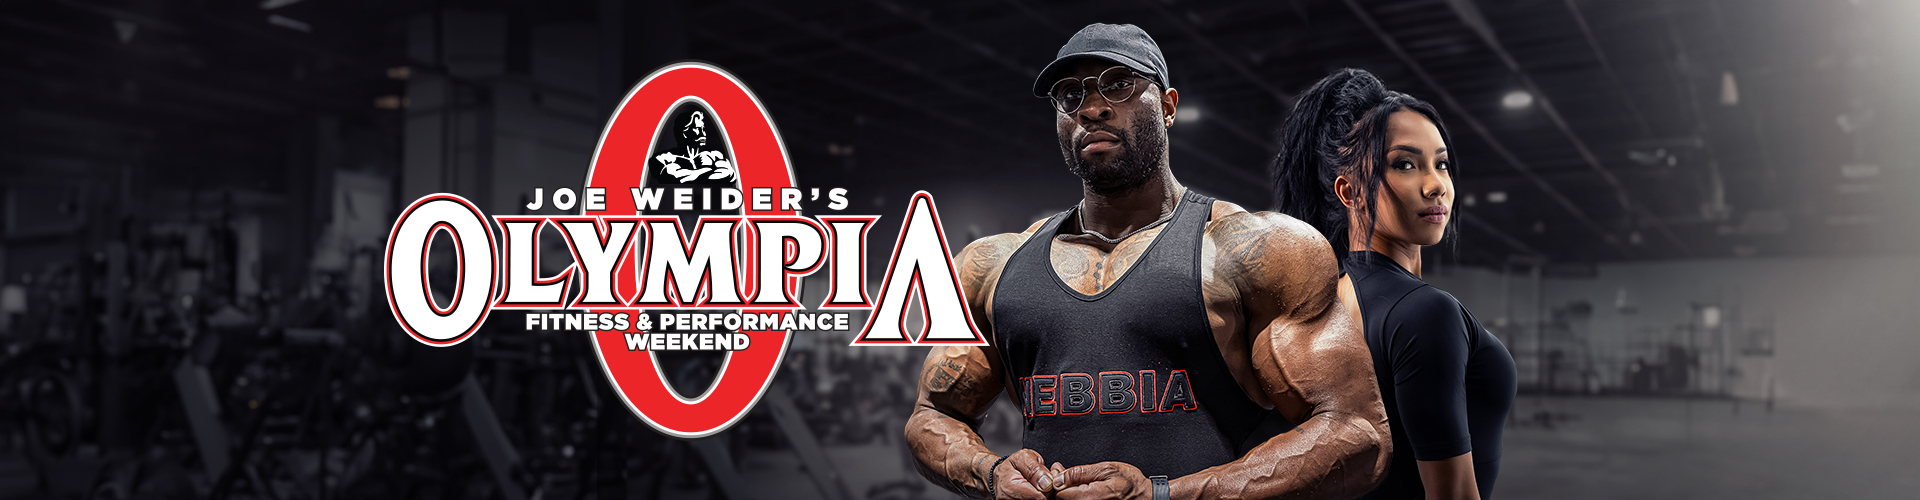 We are proud to dress the Olympia athletes